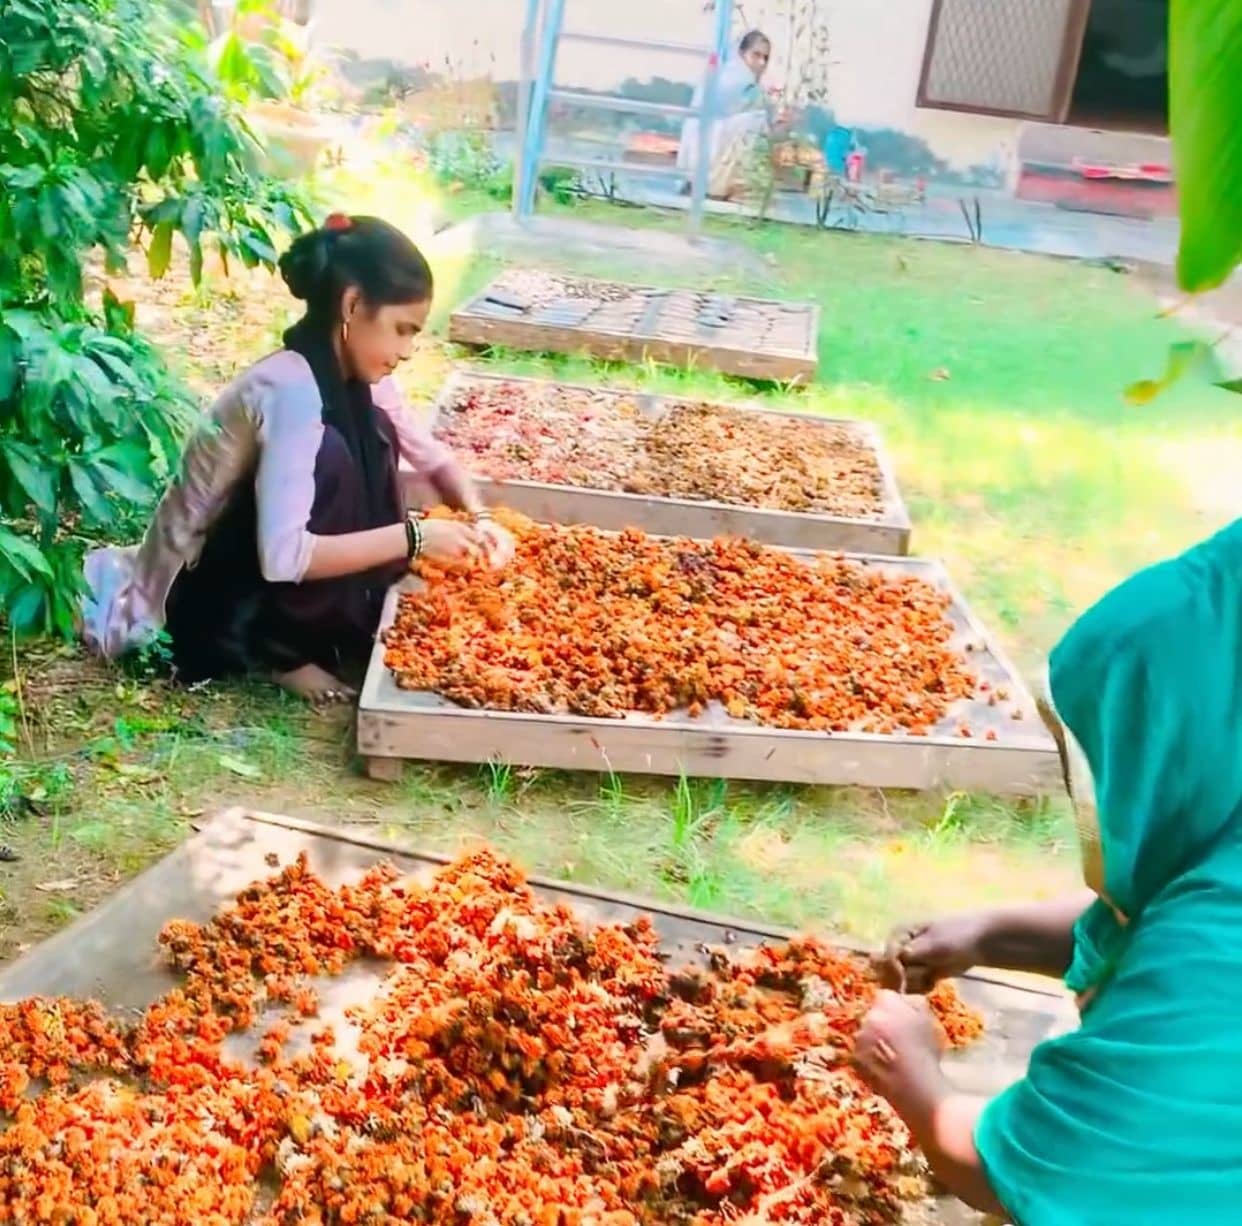 Poonam has trained over 3000 women in flower recycling